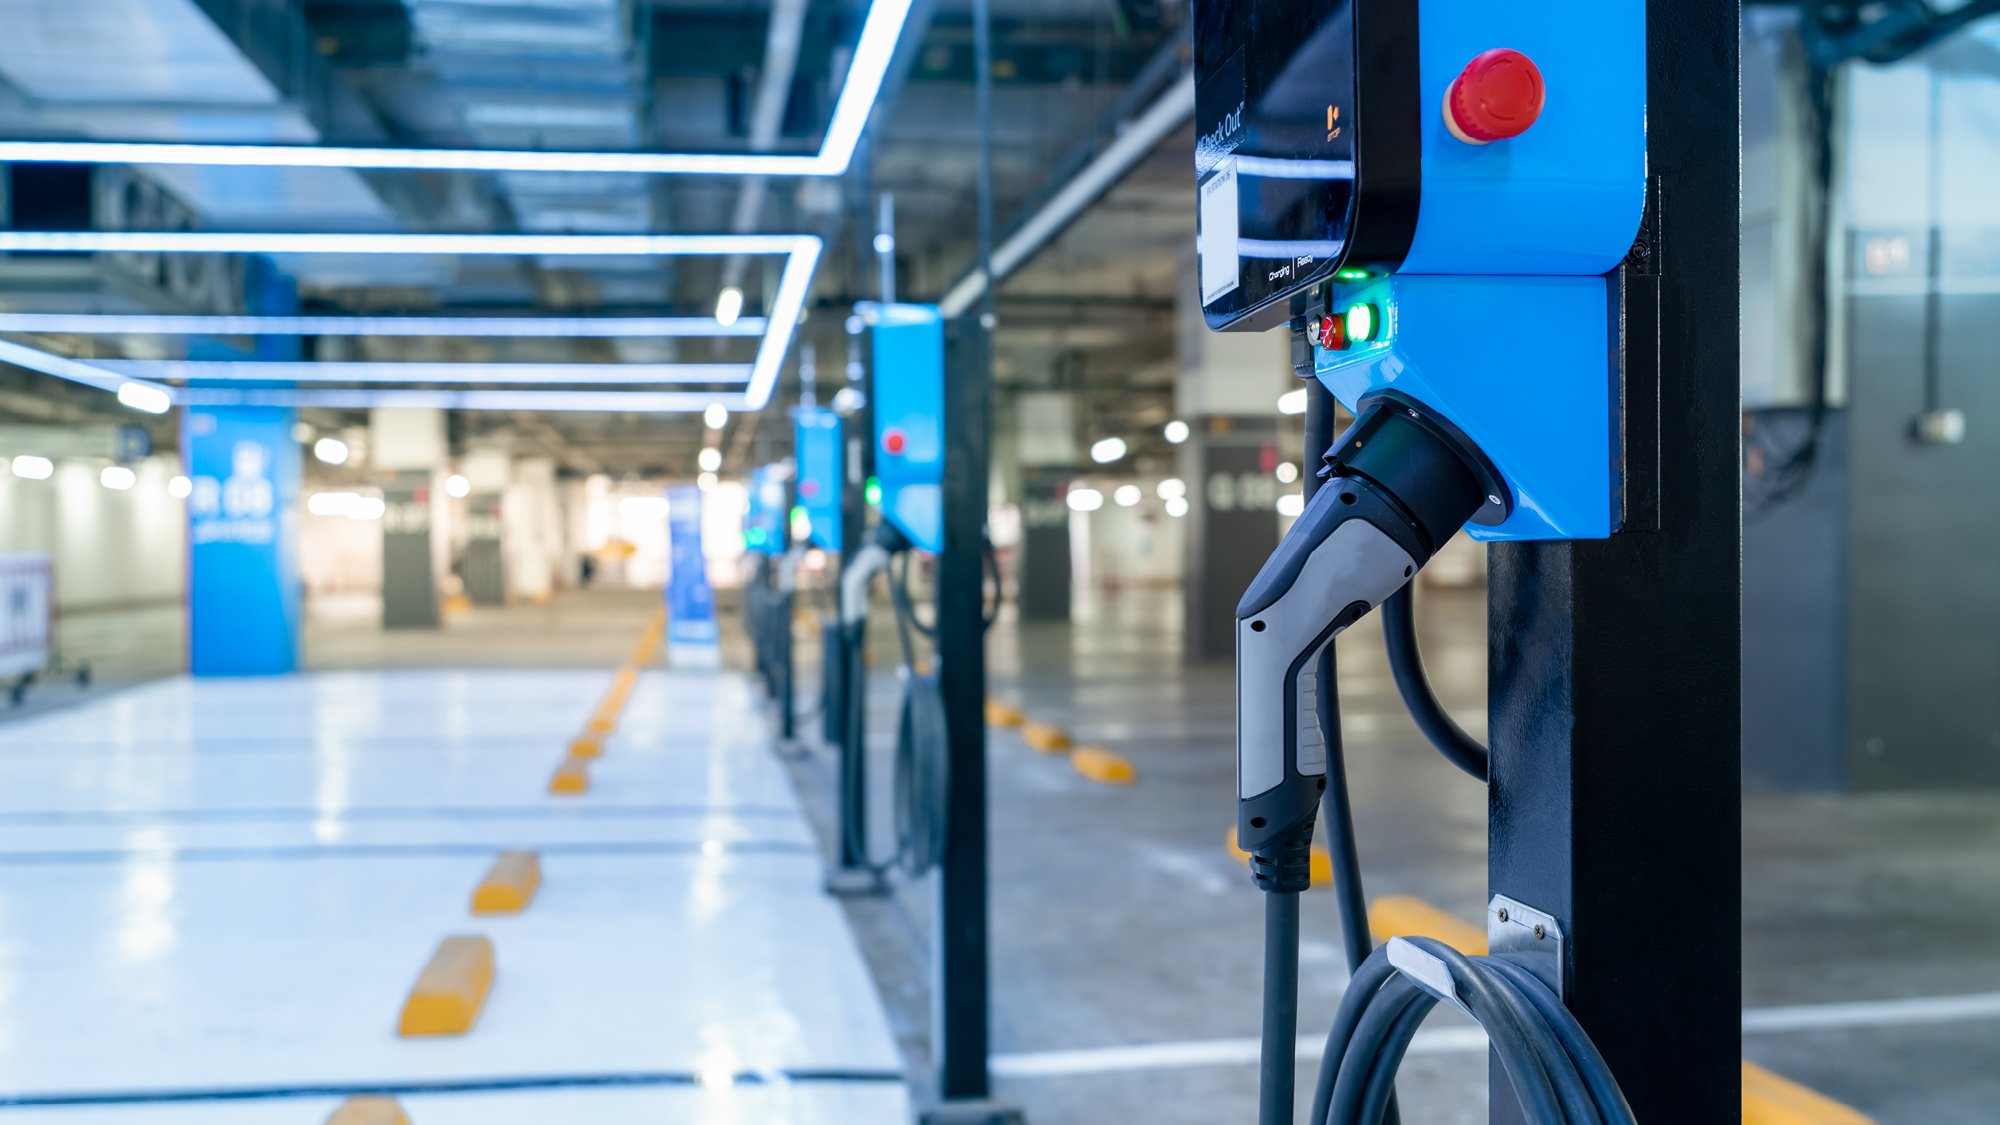 Electric vehicle charging stations inside car park